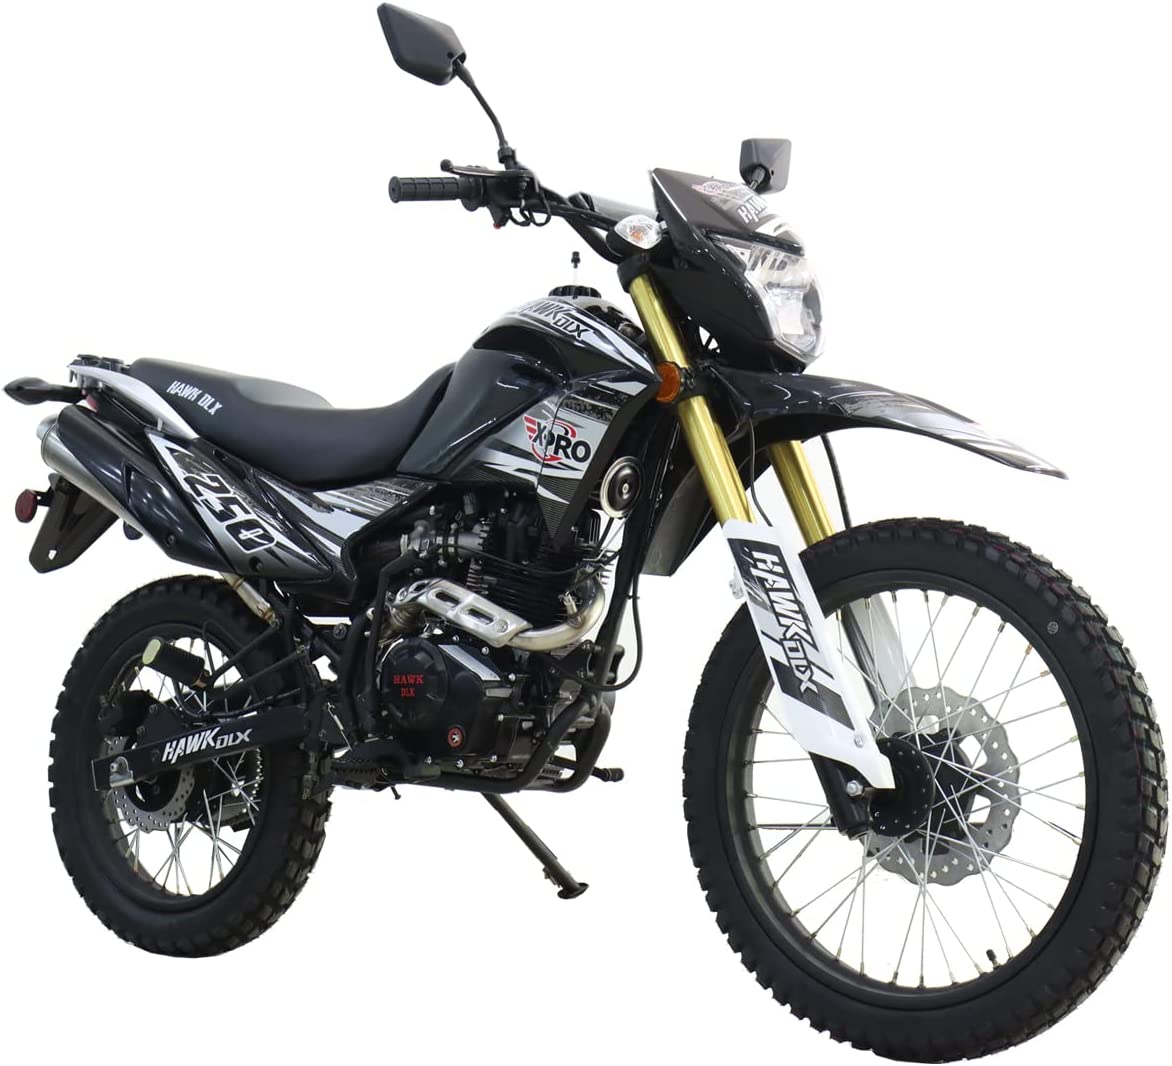 X Pro Hawk DLX 250 Street Legal Dirt Bike Best Dual Sport Motorcycle Based On Your Needs [2022]